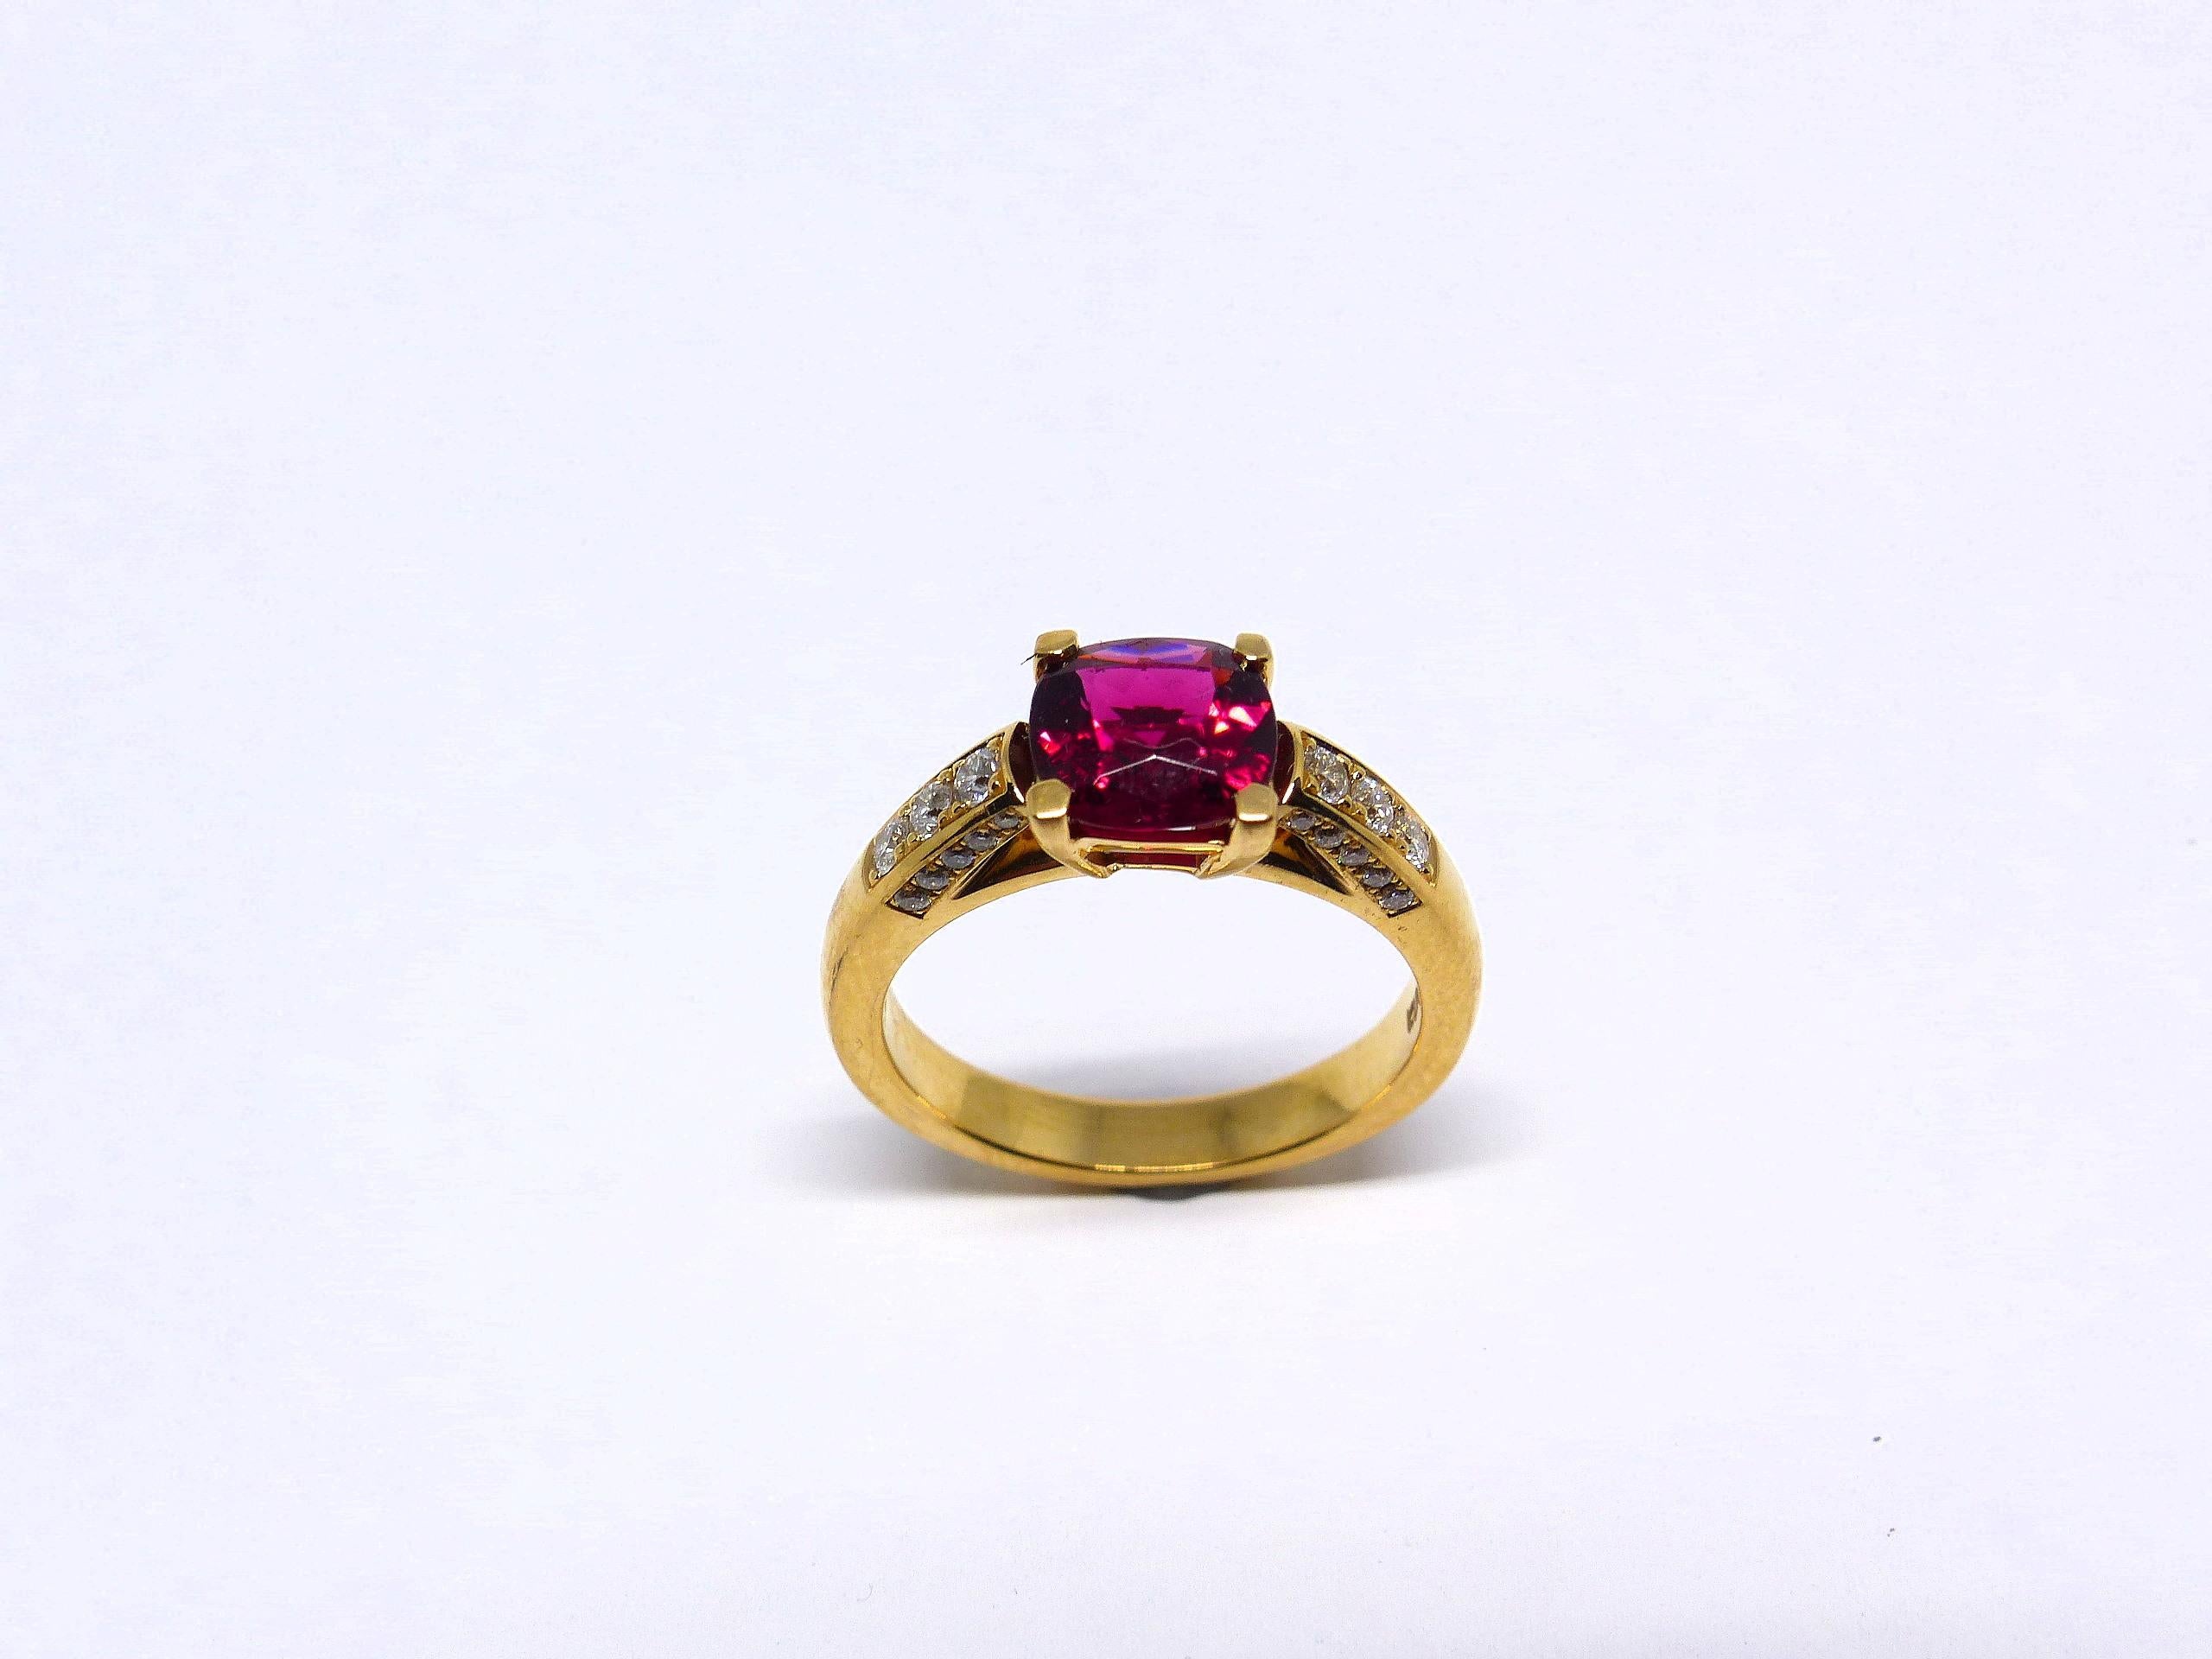 Thomas Leyser is renowned for his contemporary jewellery designs utilizing fine gemstones. 

This 18k rose gold (6.62g) ring is set with 1x fine Rubellite (facetted, cushion, 7.5mm, 1.80ct) + 26x Diamonds (brilliant-cut, 1-2mm, G/VS, 0.32ct).